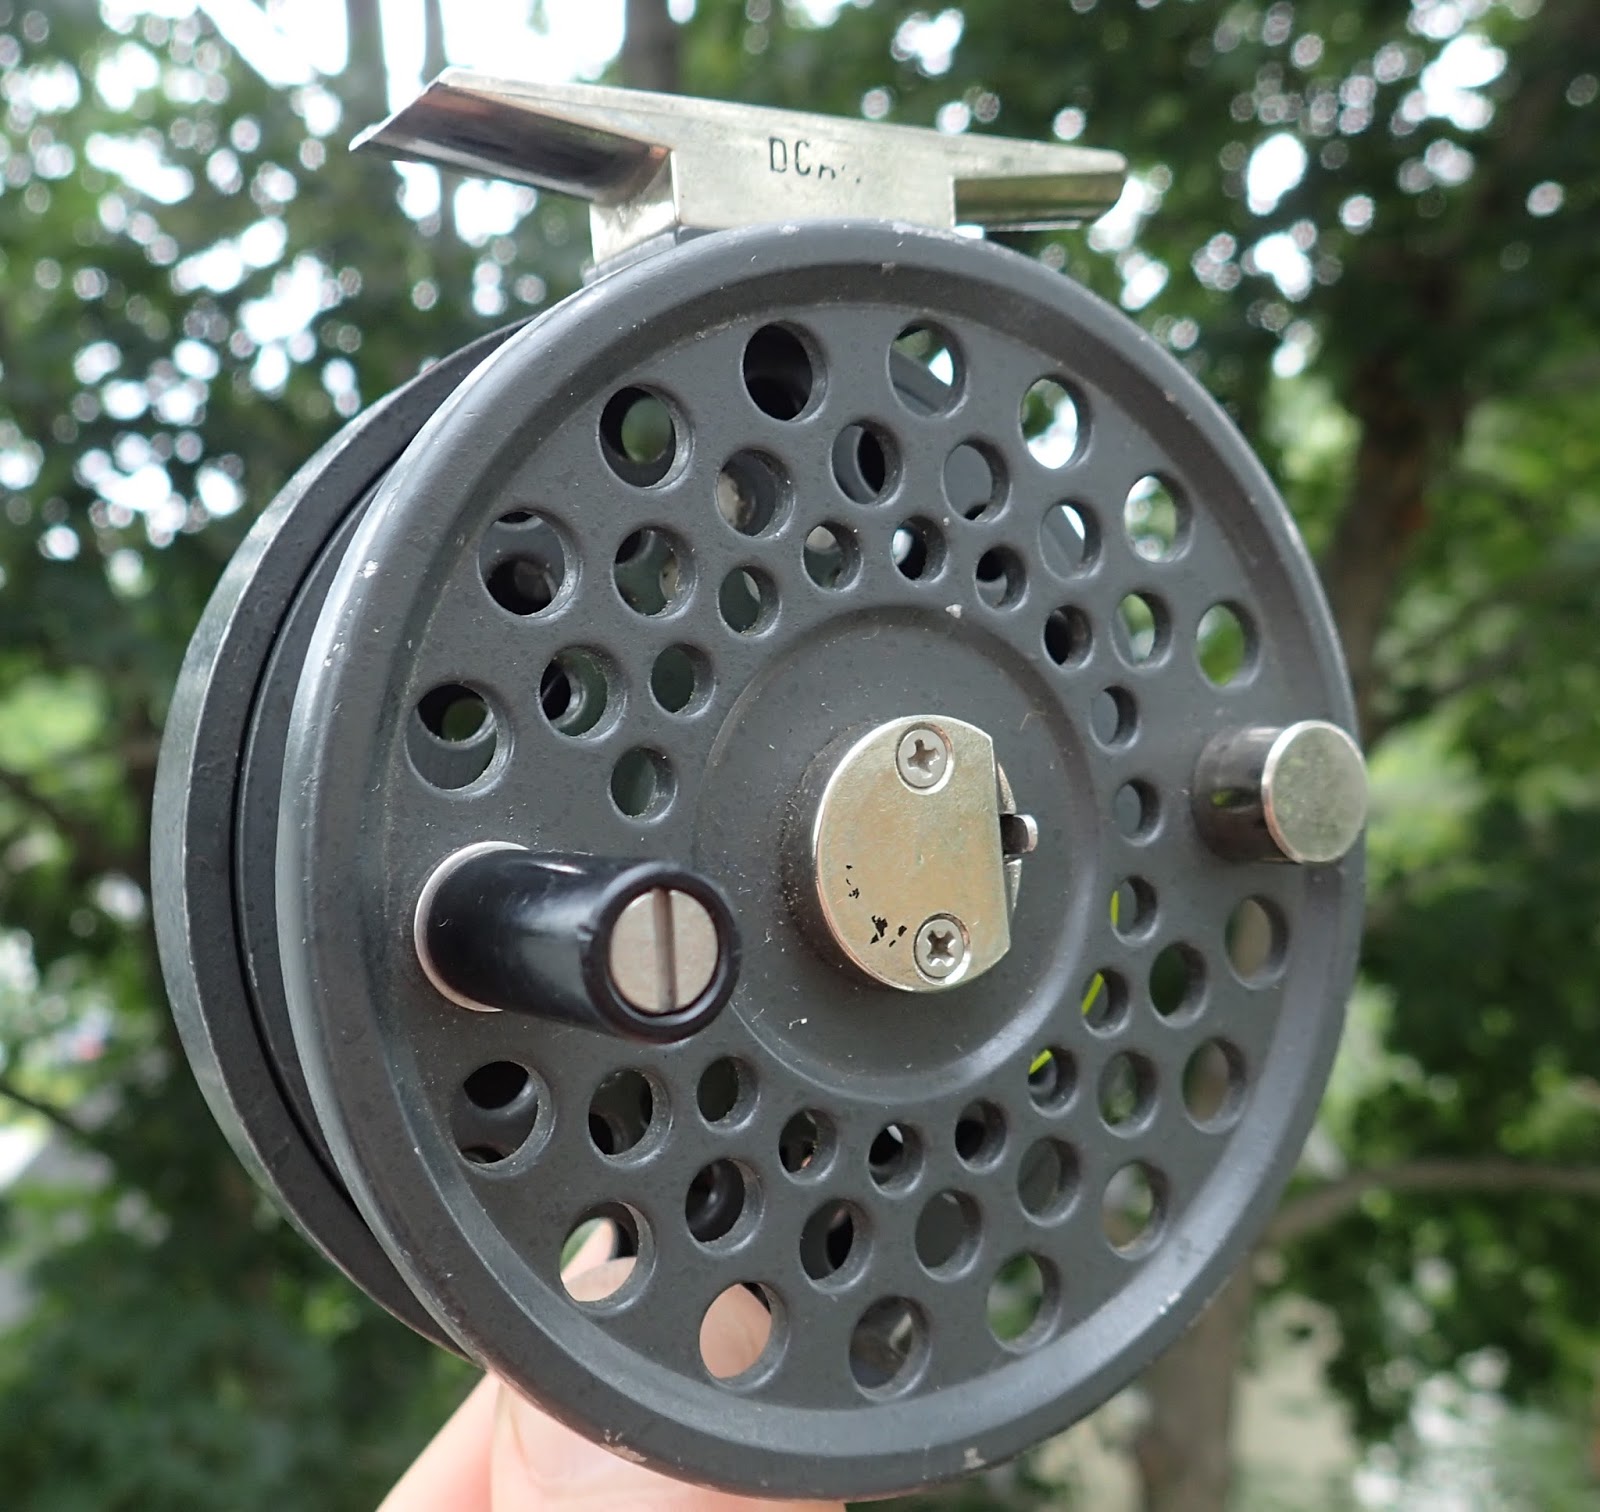 W/ Case. Details about   Lamson LP2 Fly Fishing Reel Made in USA 